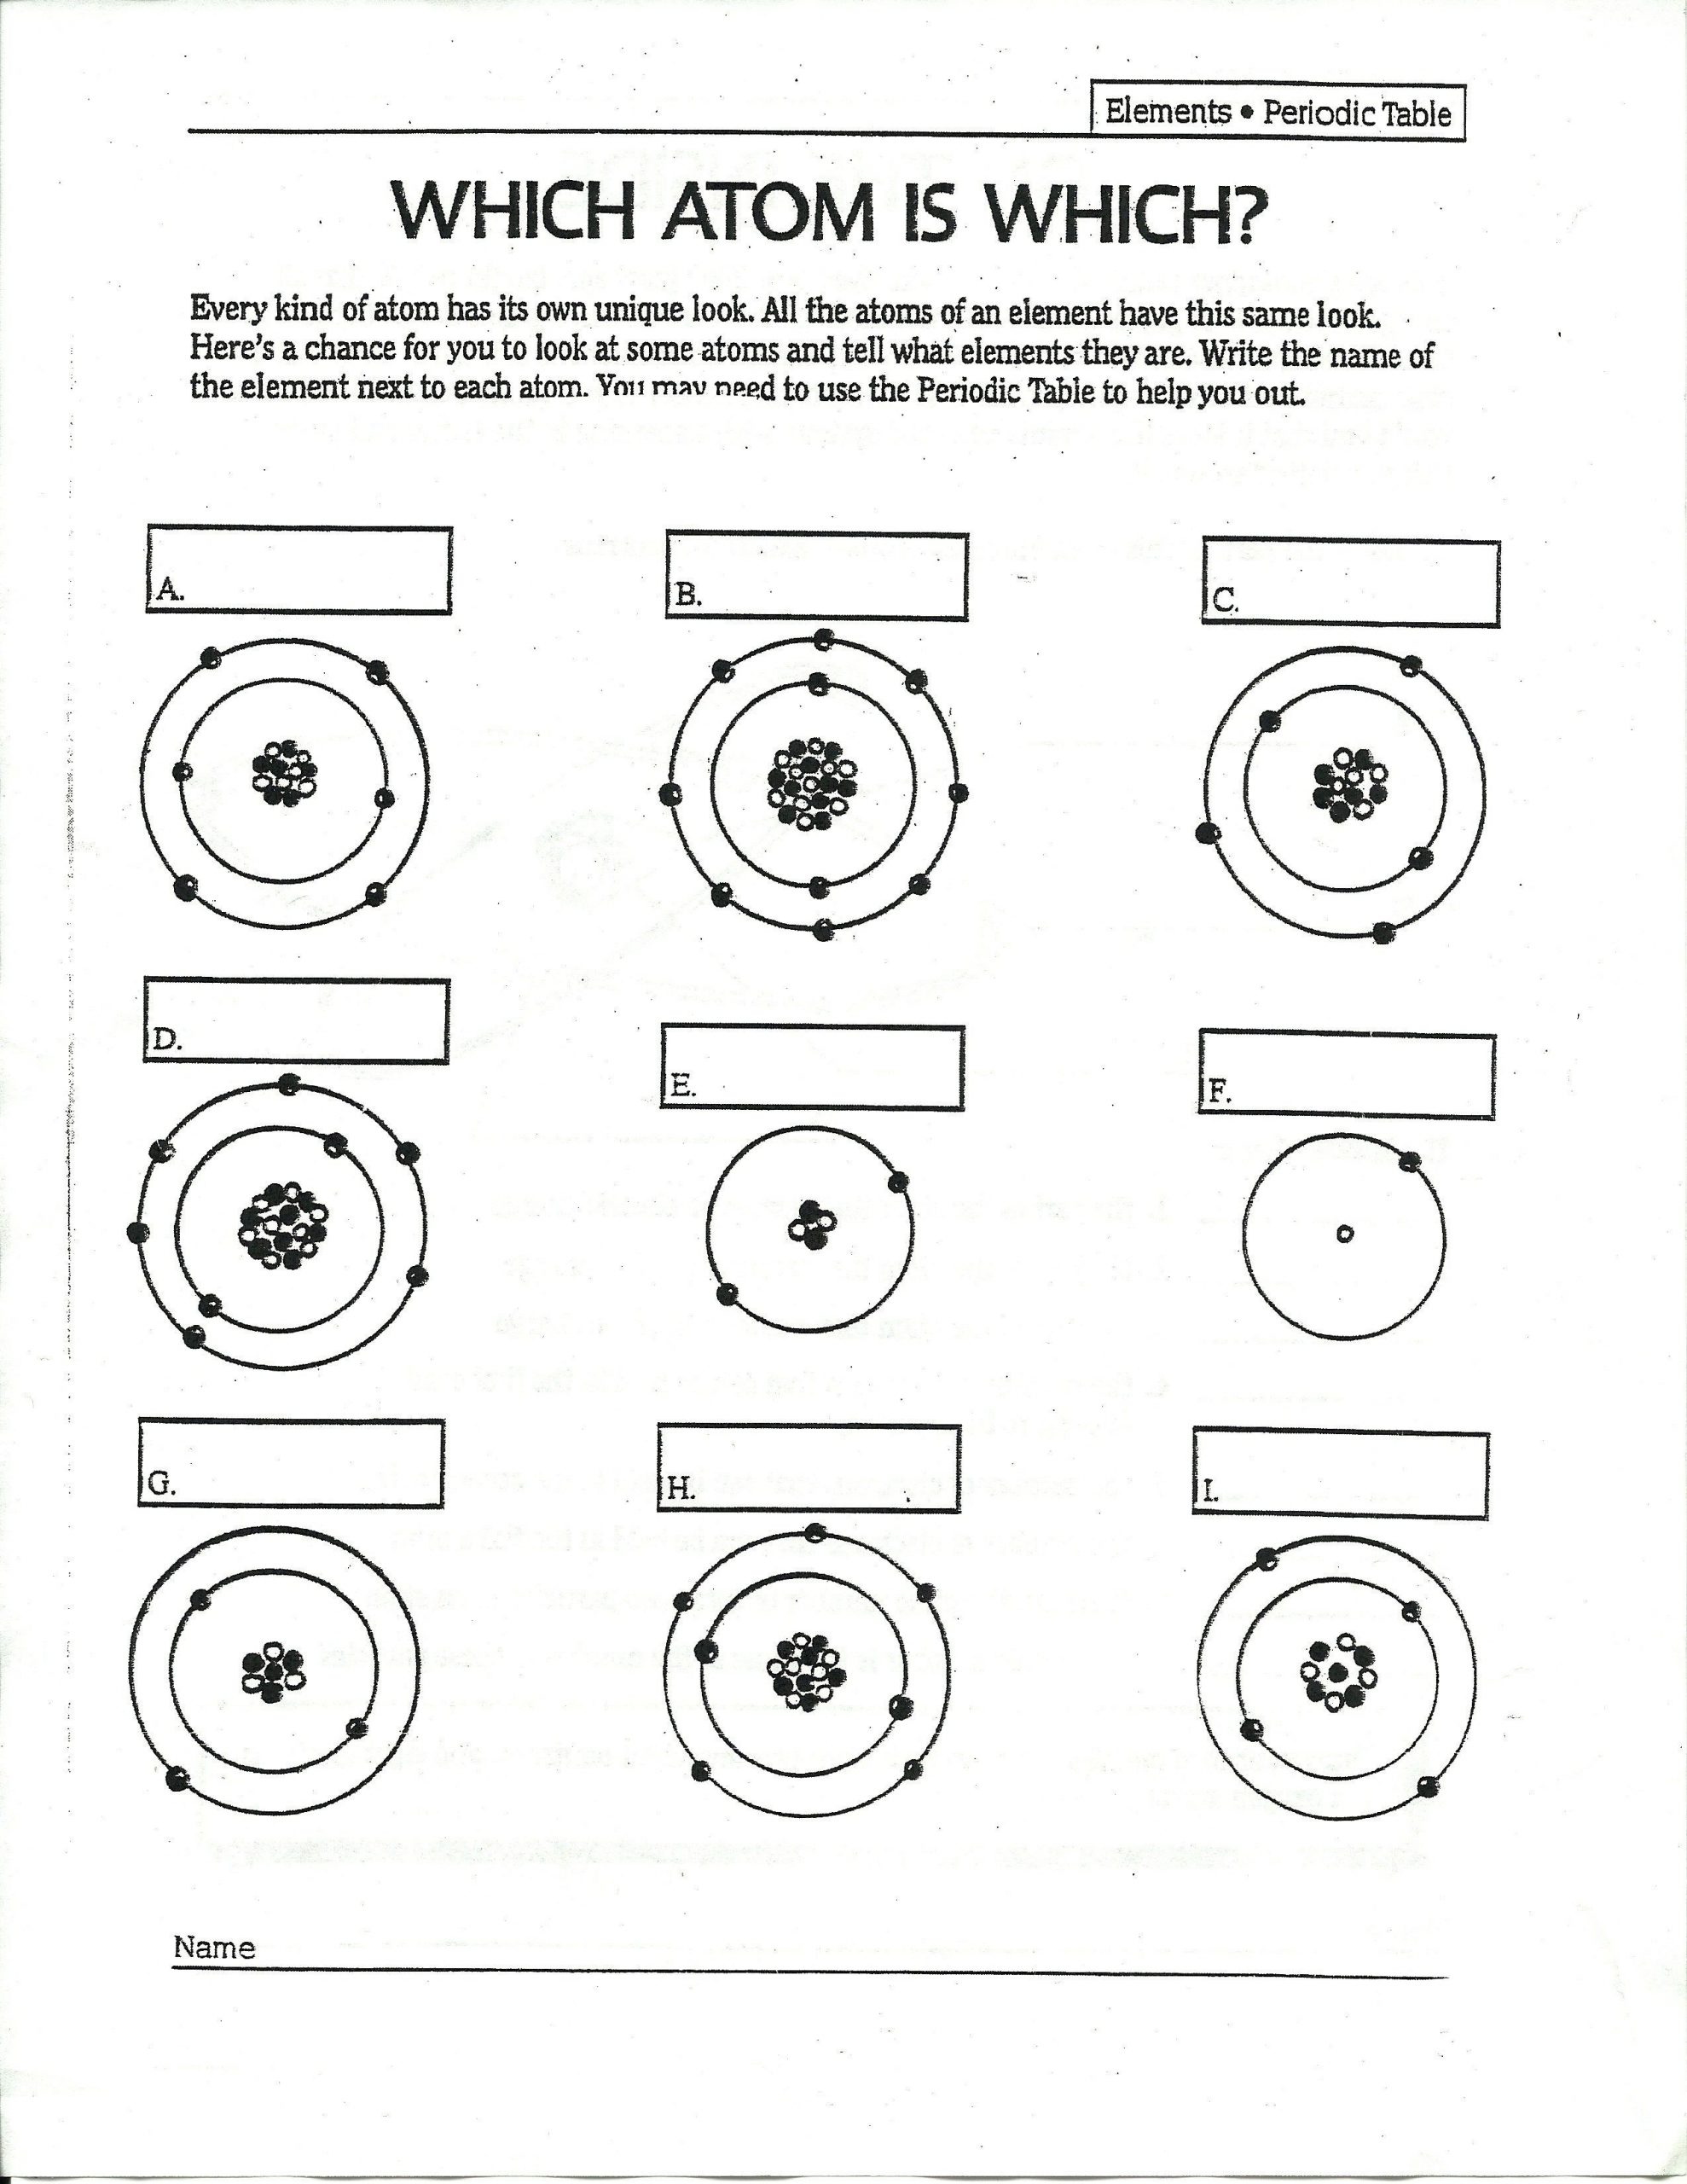 Bohr Model Worksheet Answers Answers to Drawing atoms Worksheet Answers to Drawing